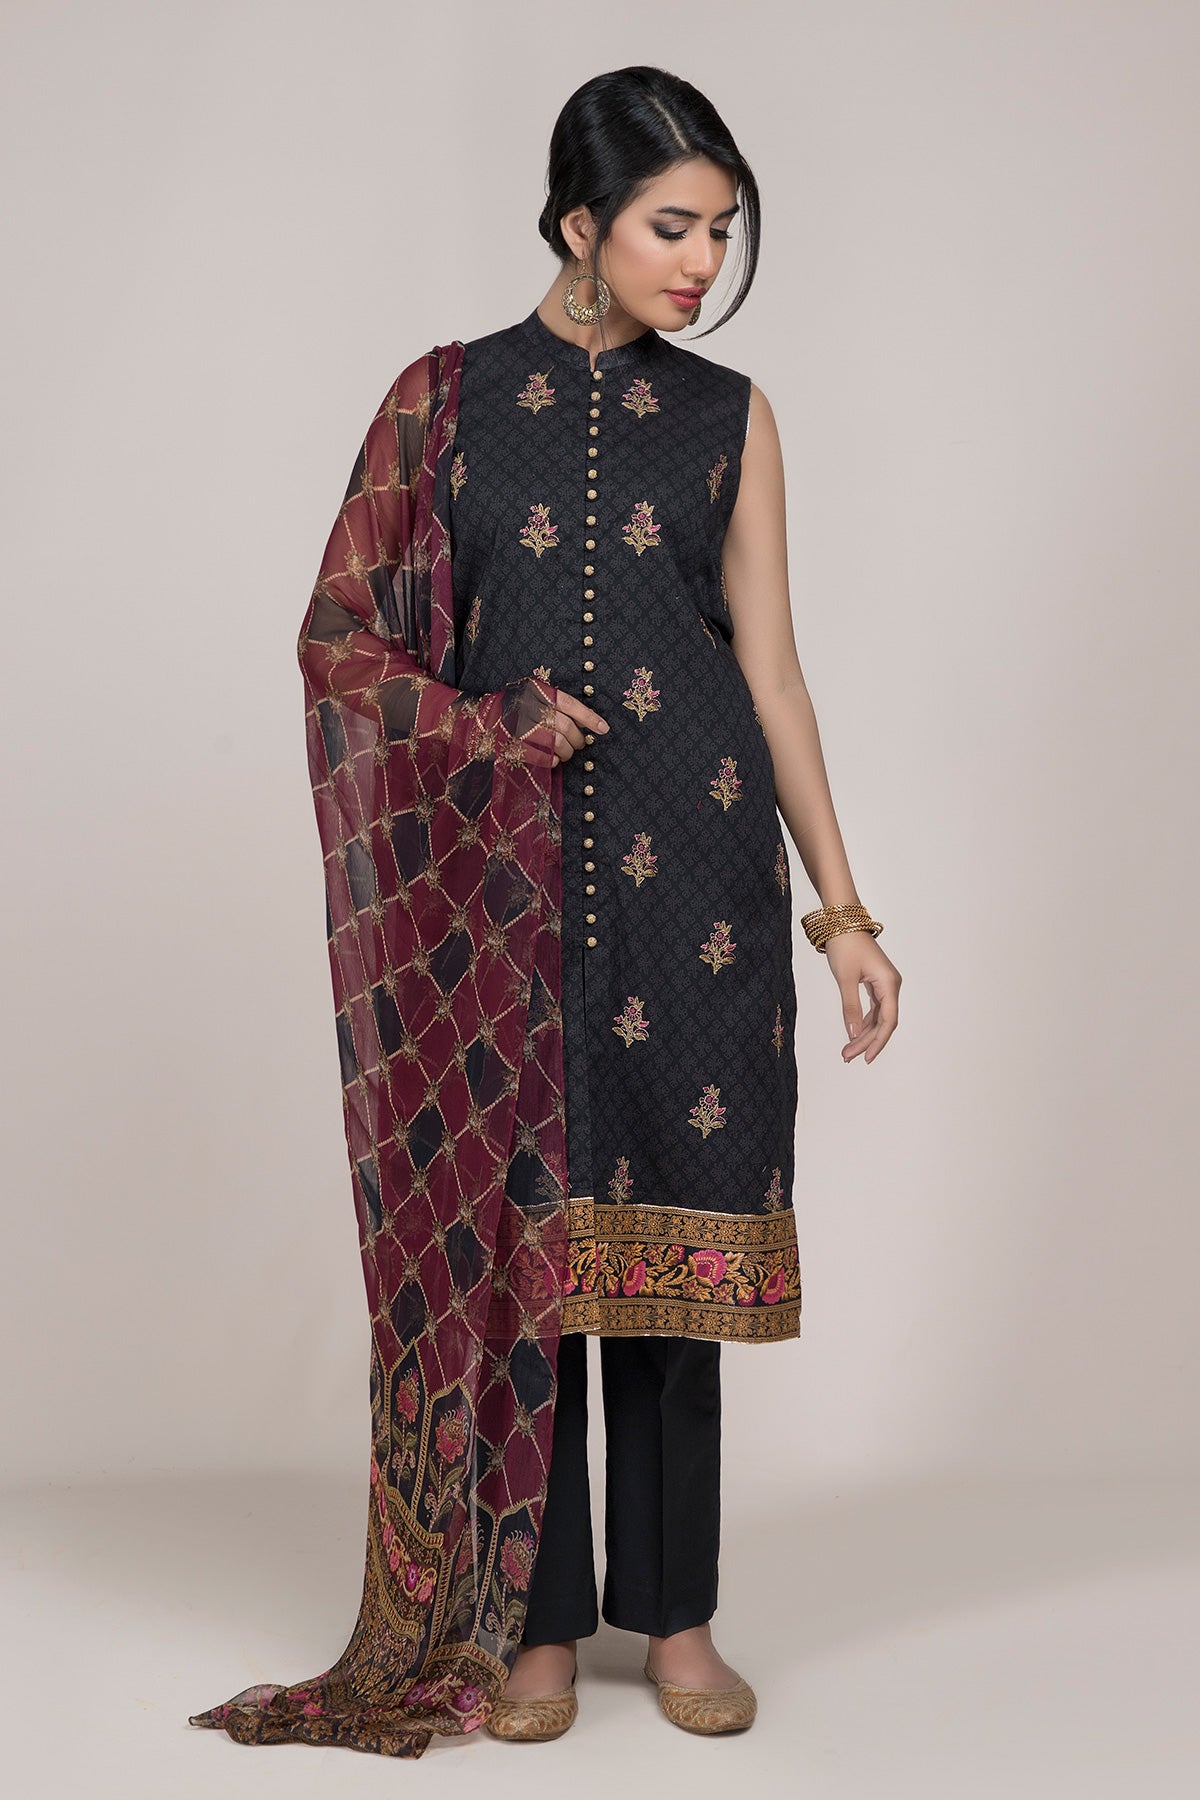 Printed & Embroidered 3 Pcs Suit With digital Print chiffon Dupatta